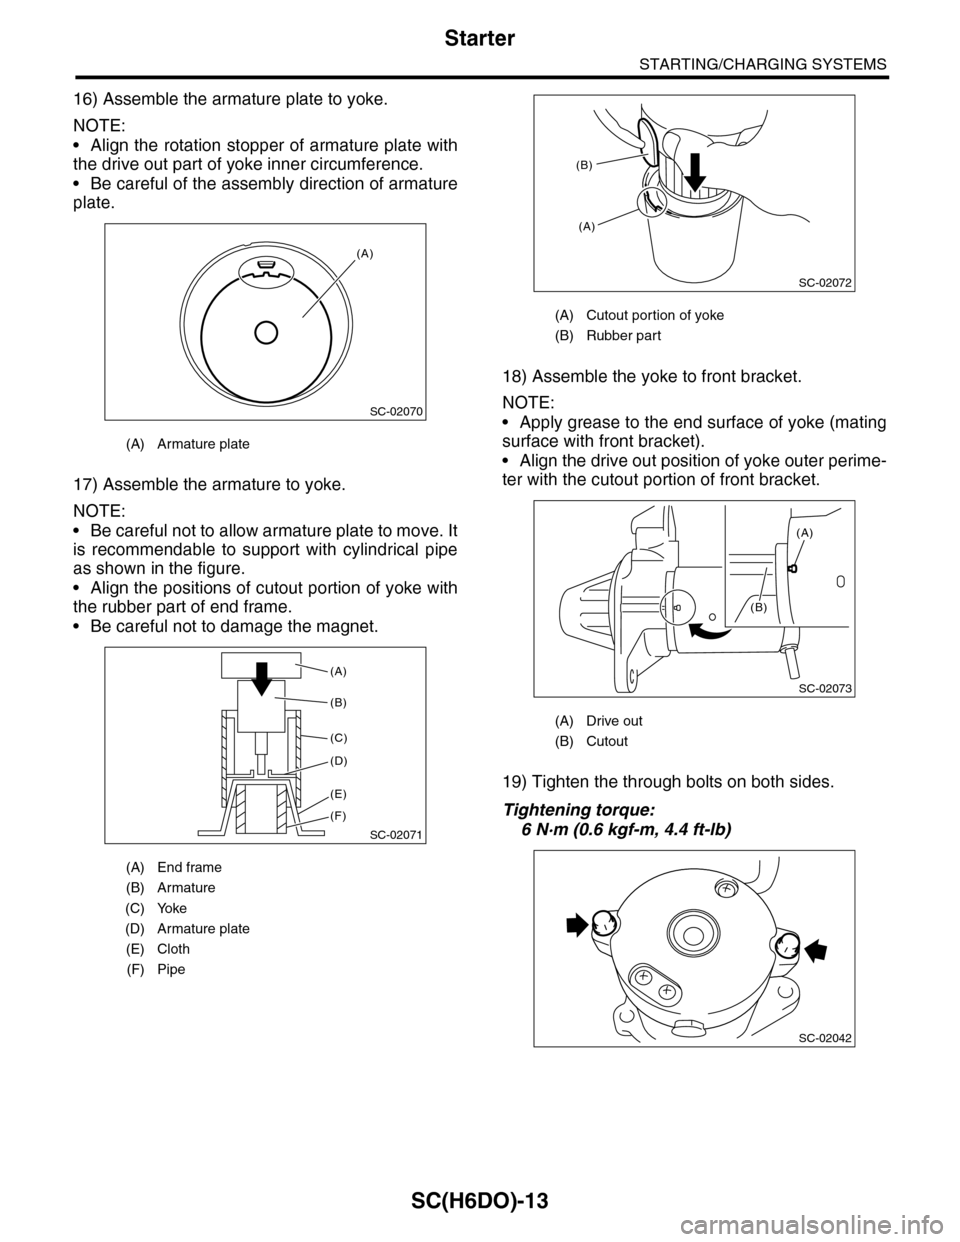 SUBARU TRIBECA 2009 1.G Service Owners Manual SC(H6DO)-13
Starter
STARTING/CHARGING SYSTEMS
16) Assemble the armature plate to yoke.
NOTE:
•Align the rotation stopper of armature plate with
the drive out part of yoke inner circumference.
•Be 